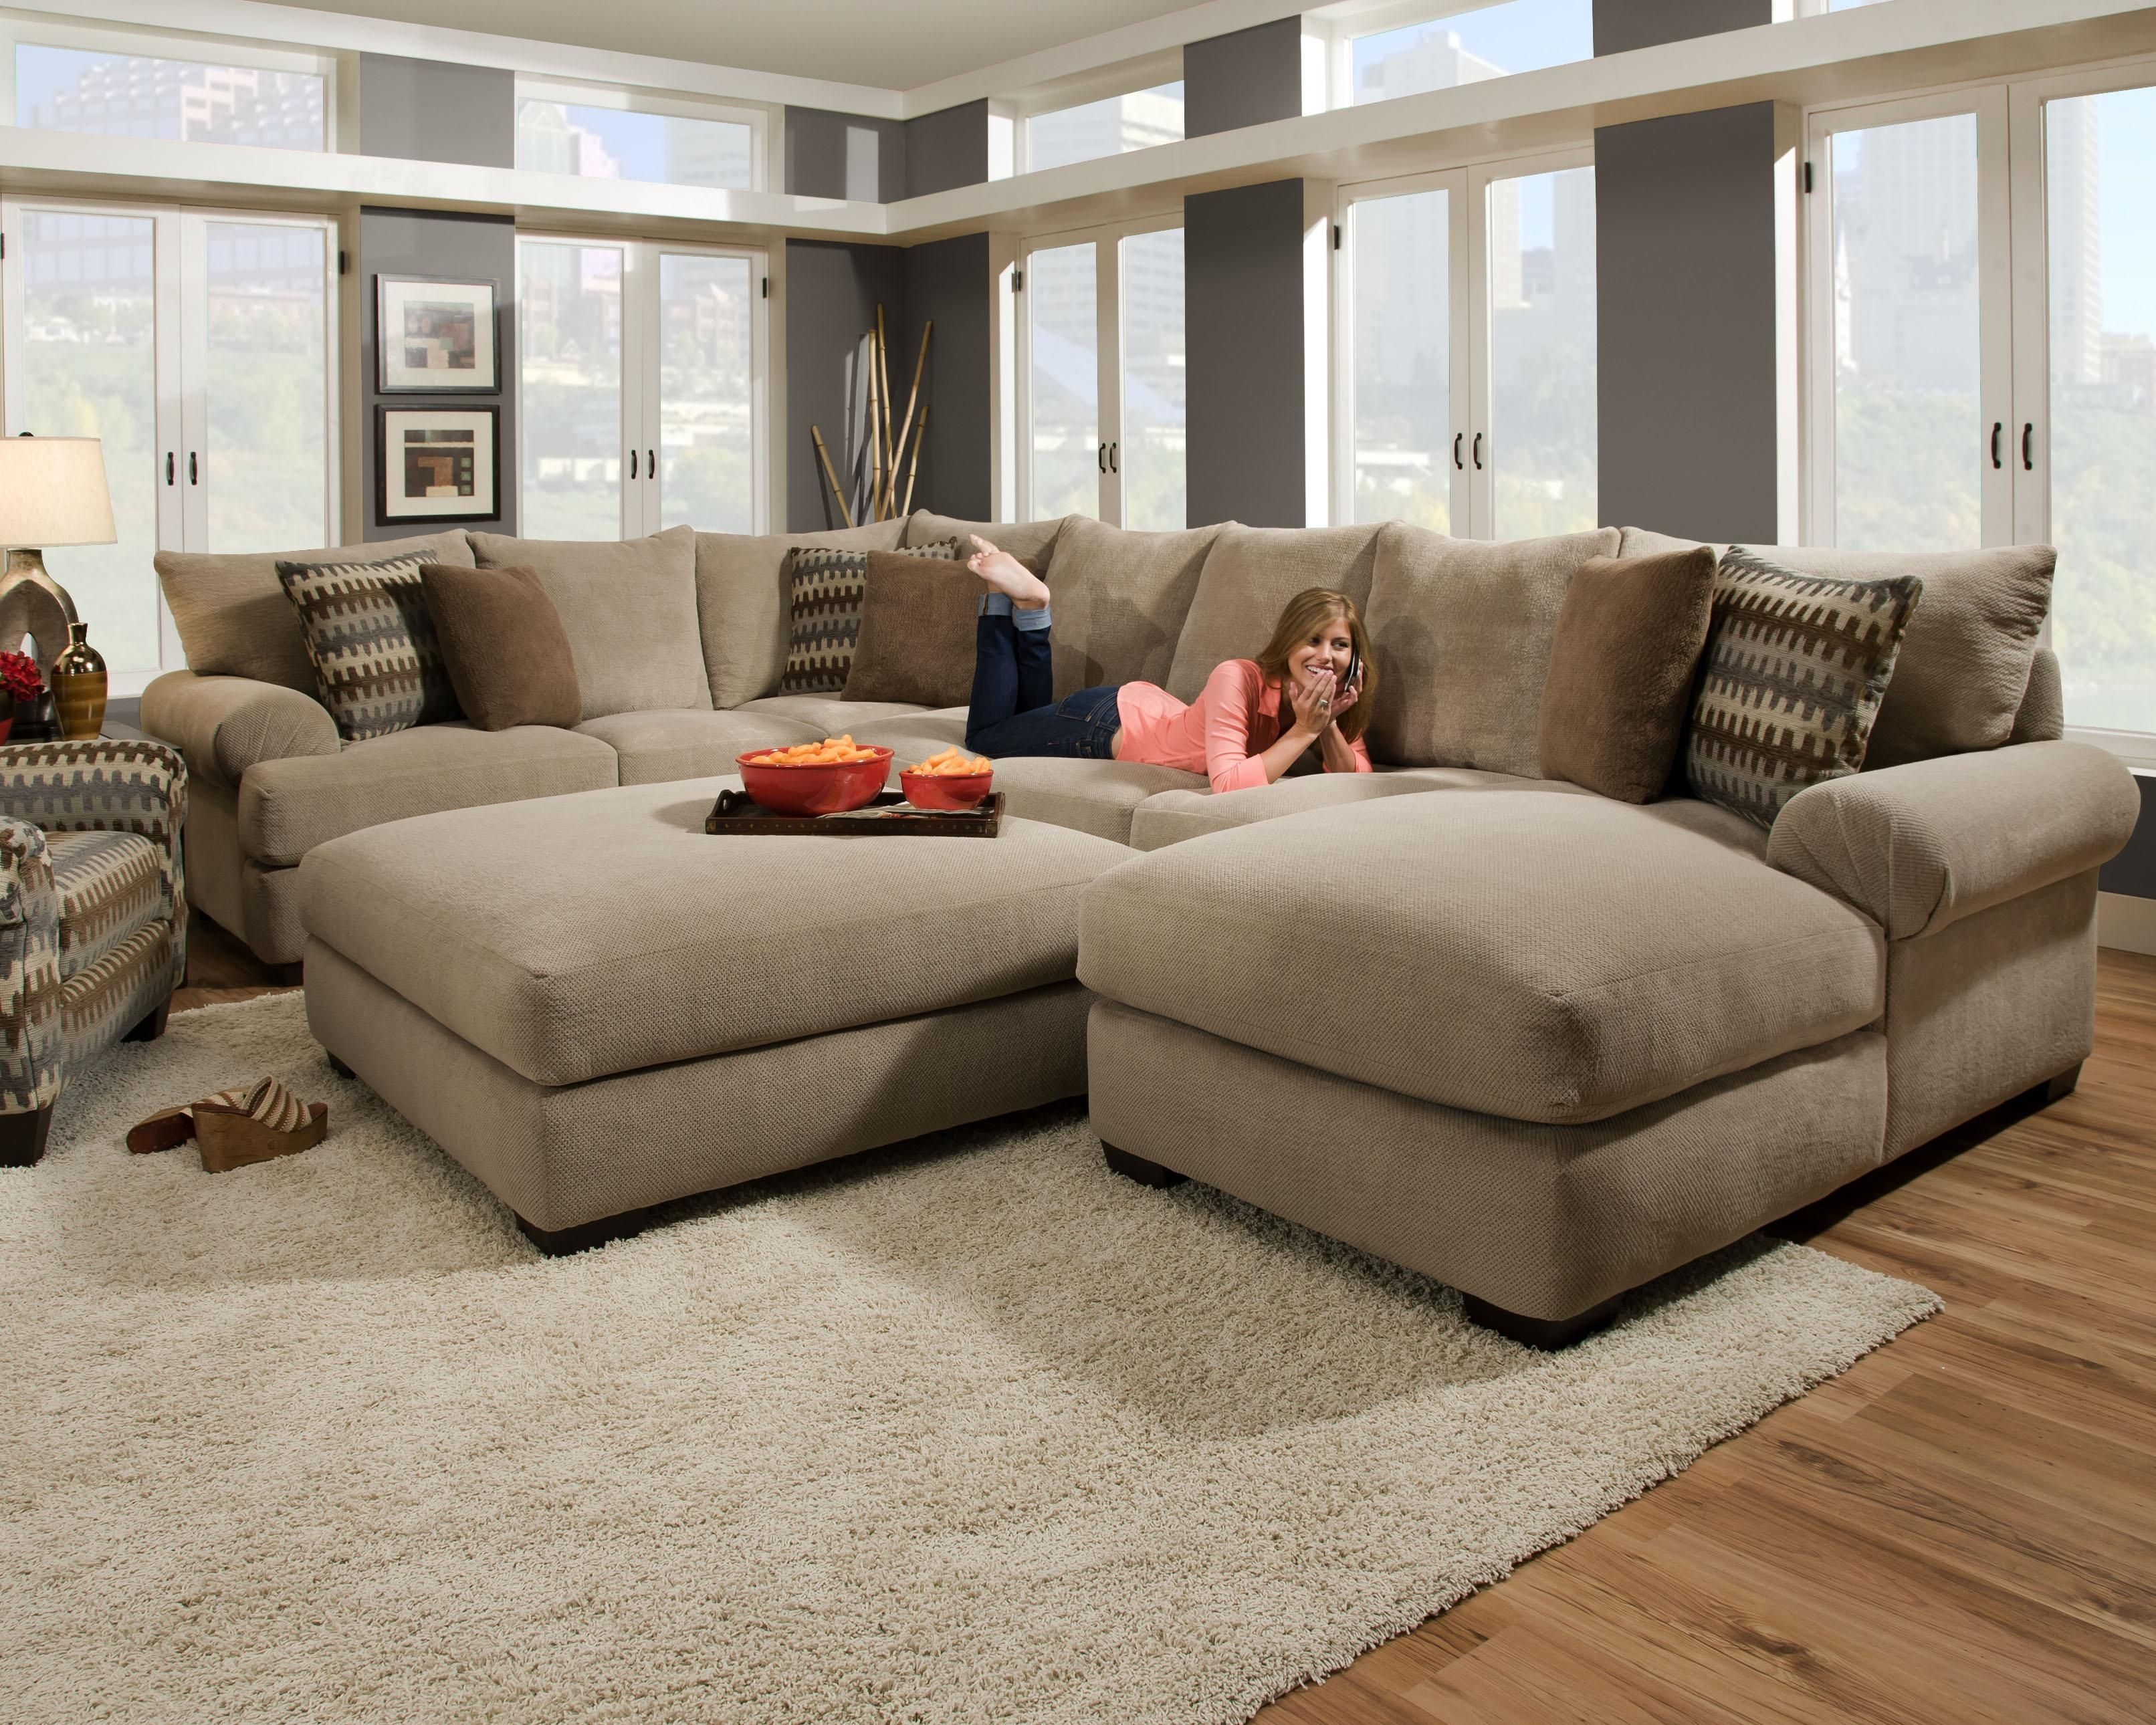 Corinthian 61a0 Sectional Sofa With Right Side Chaise | Furniture Throughout Greenville Nc Sectional Sofas (Photo 4 of 10)